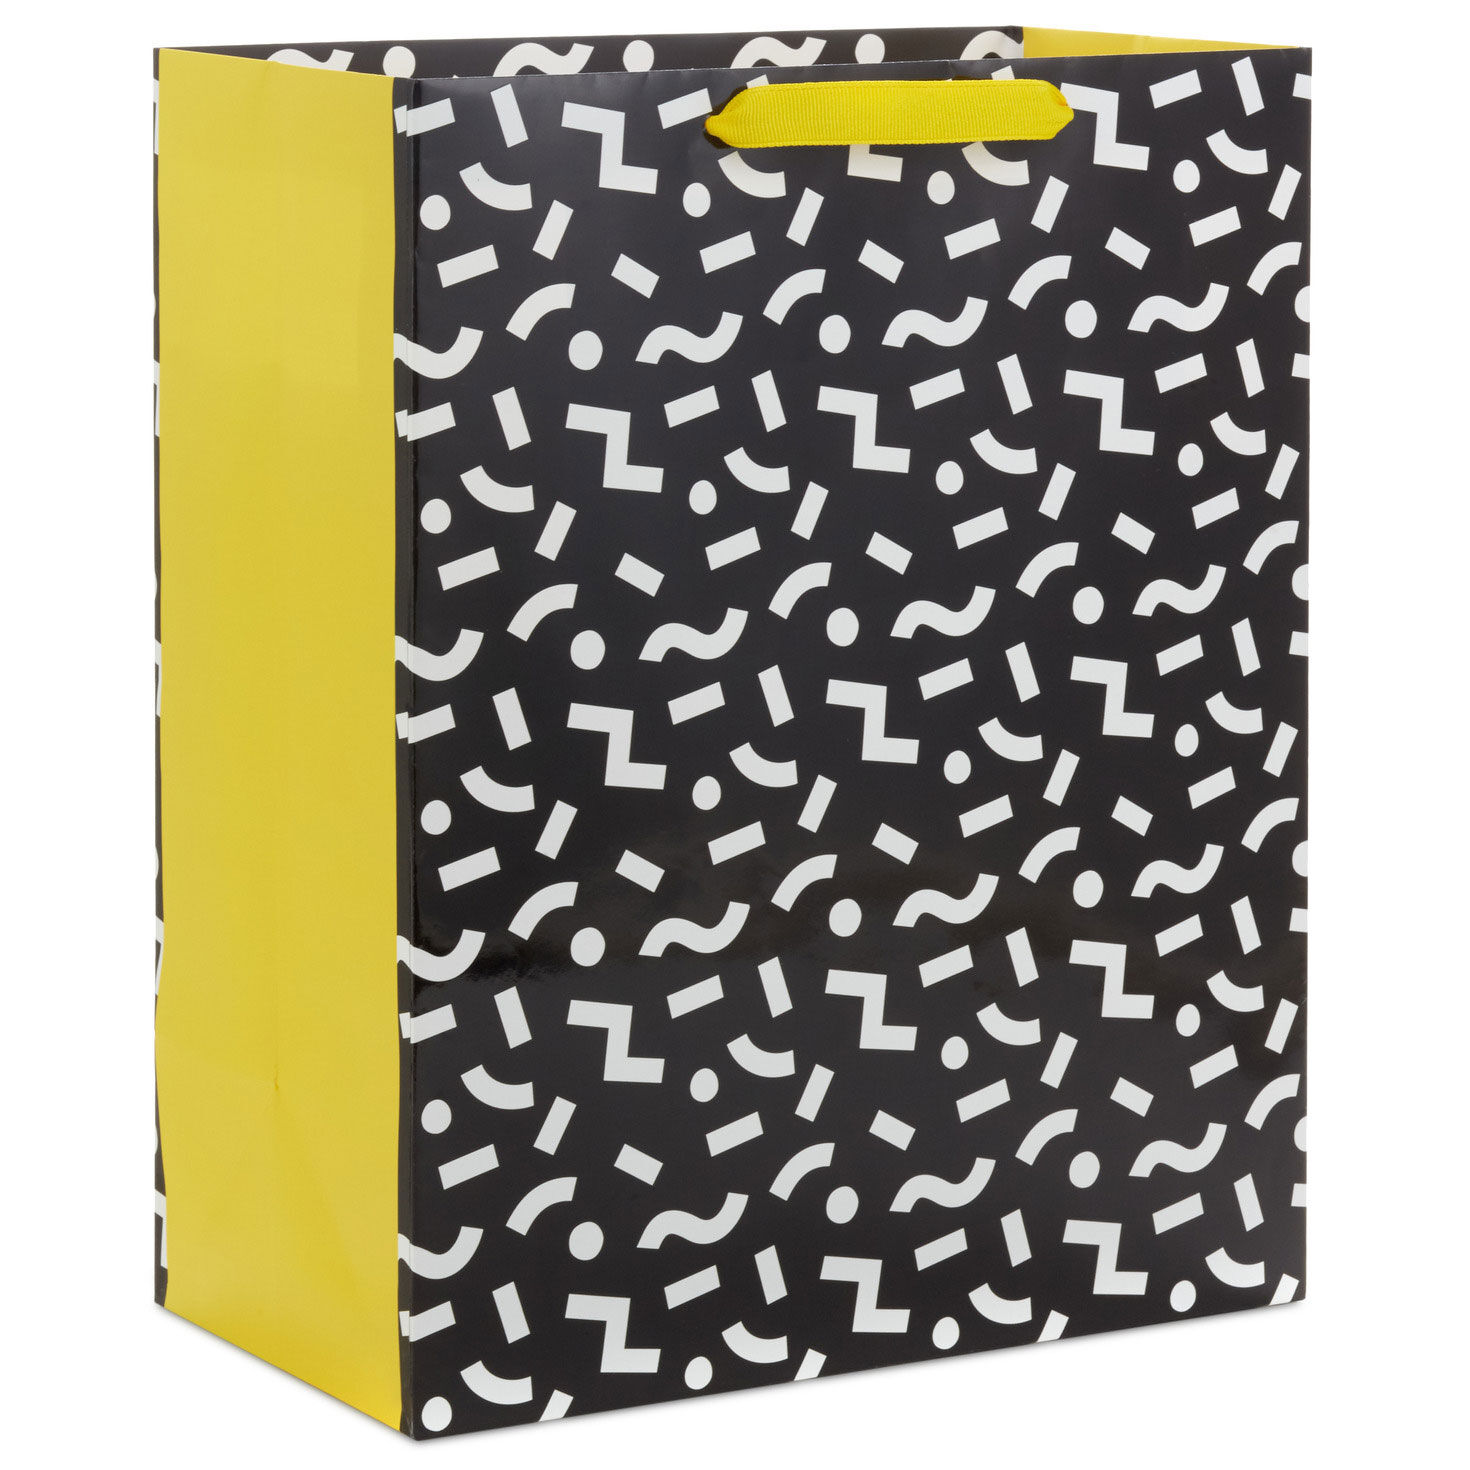 Hallmark All Occasion Gift Bags Assortment with Tissue Paper - Black and Gold (Pack of 3, 2 Large 13 inch and 1 Medium 9 inch for Anniversaries